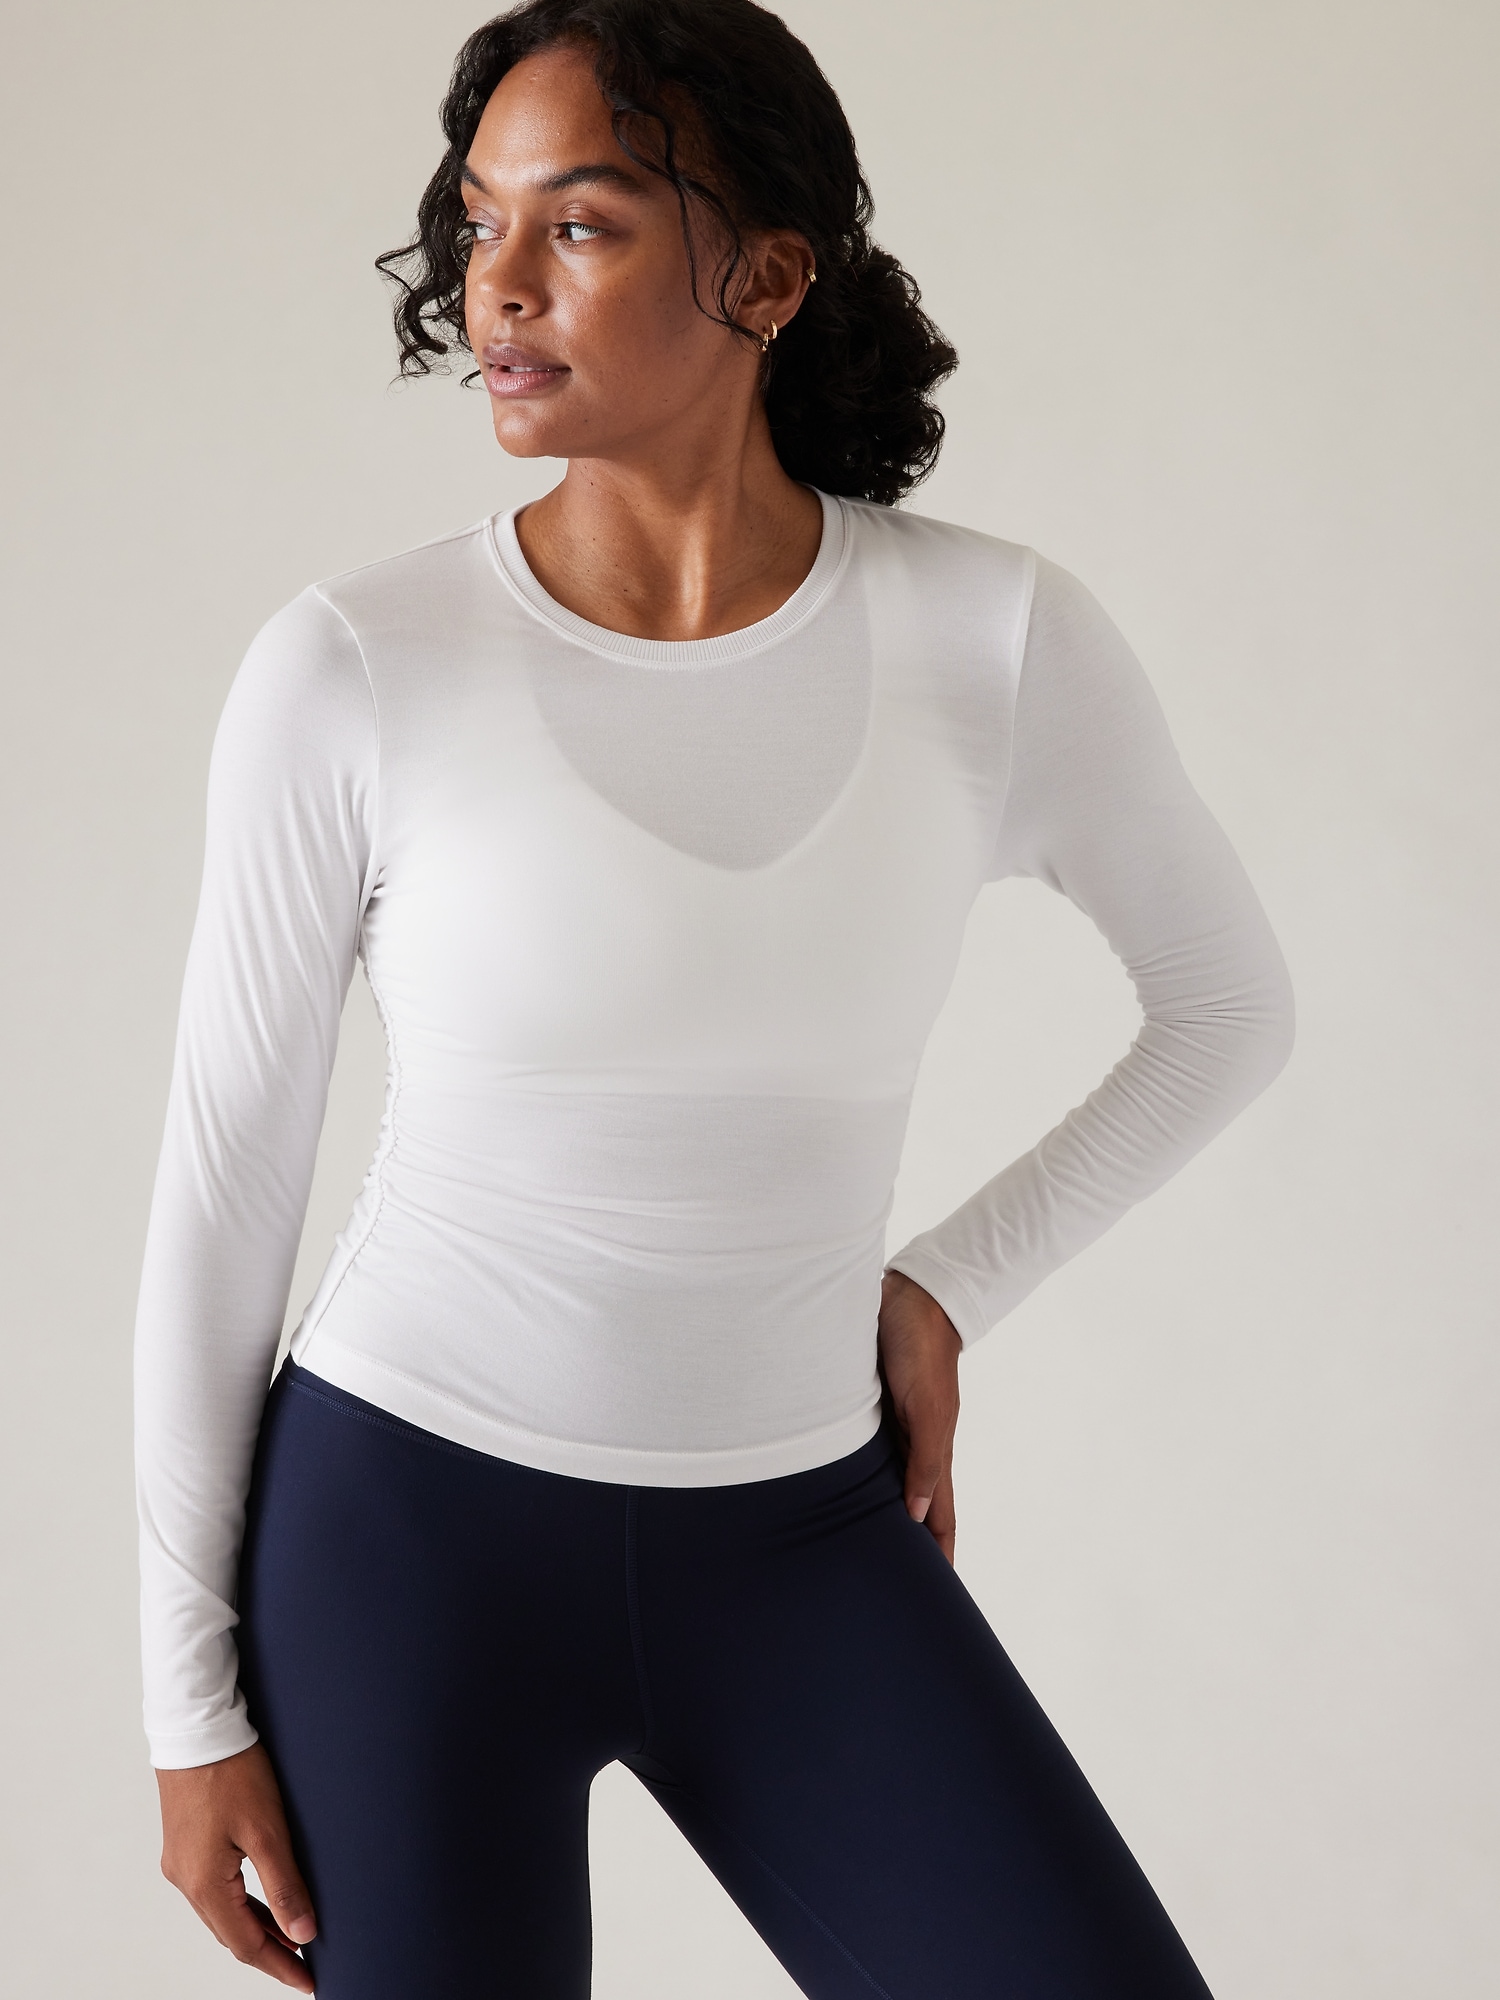 Athleta With Ease Cinch Top In Bright White